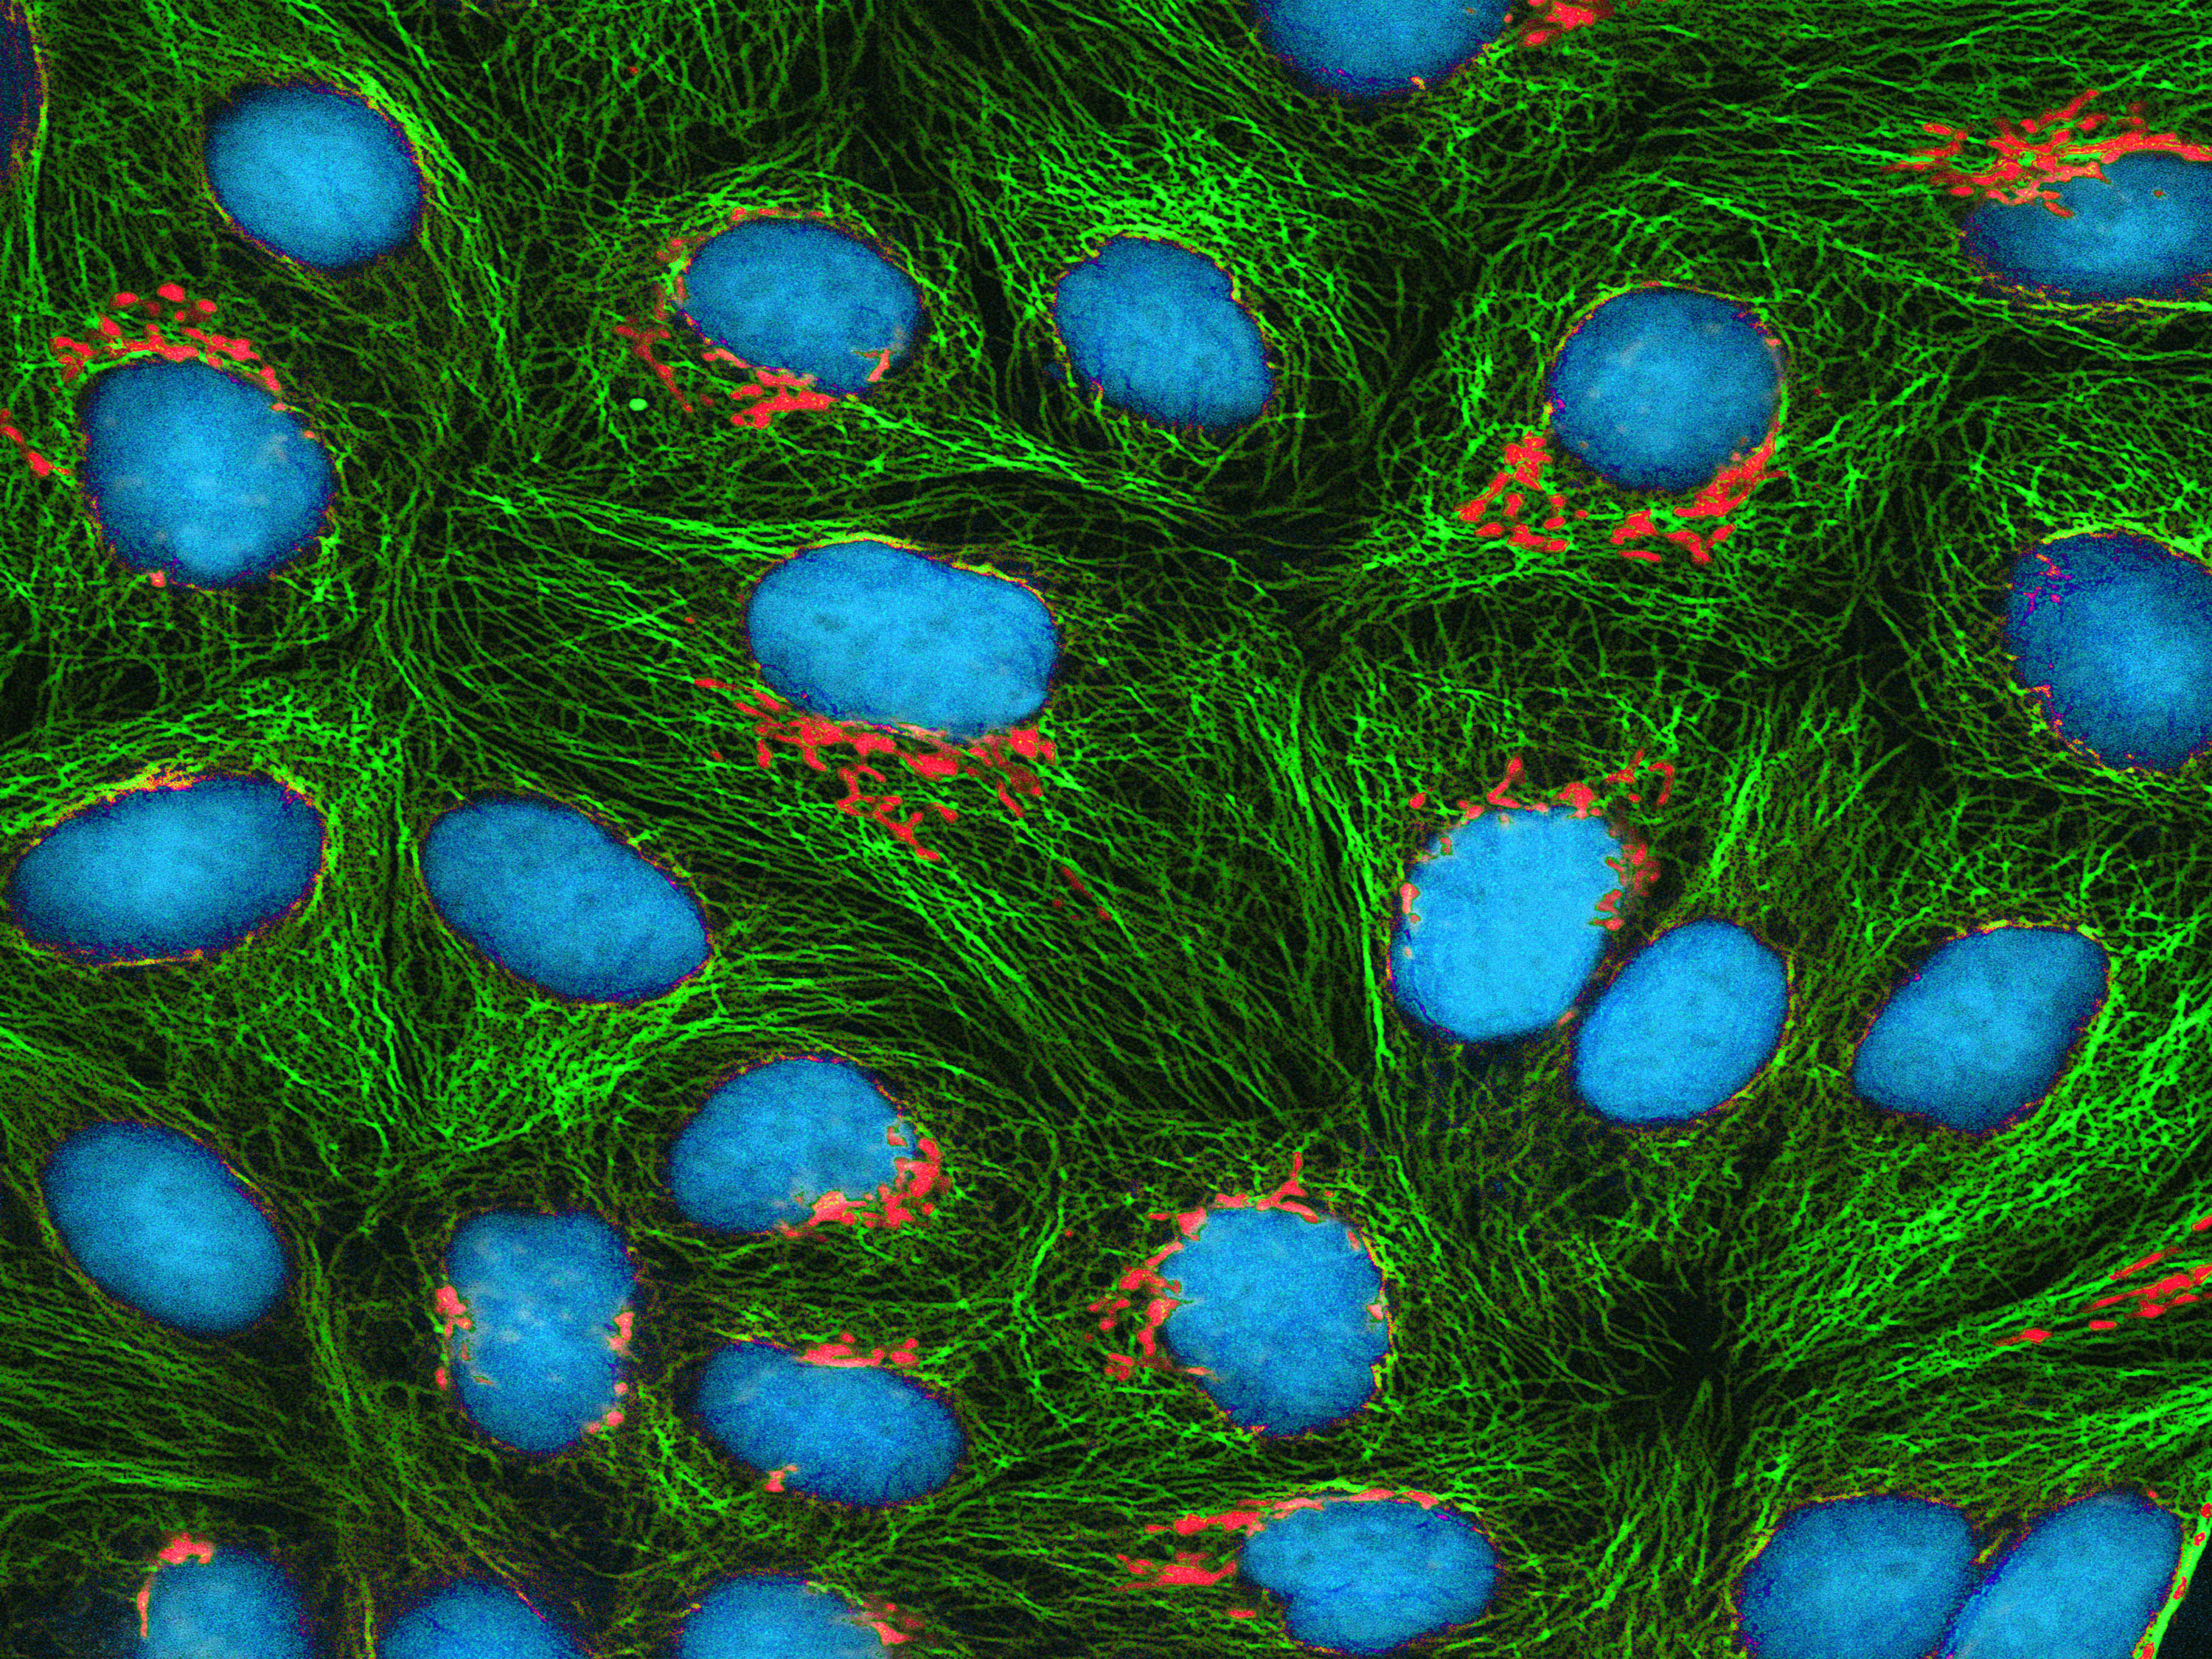 An image of HeLa cells, a human cell line used for research, as seen under an electron microscope. Image created by Thomas Deerinck.